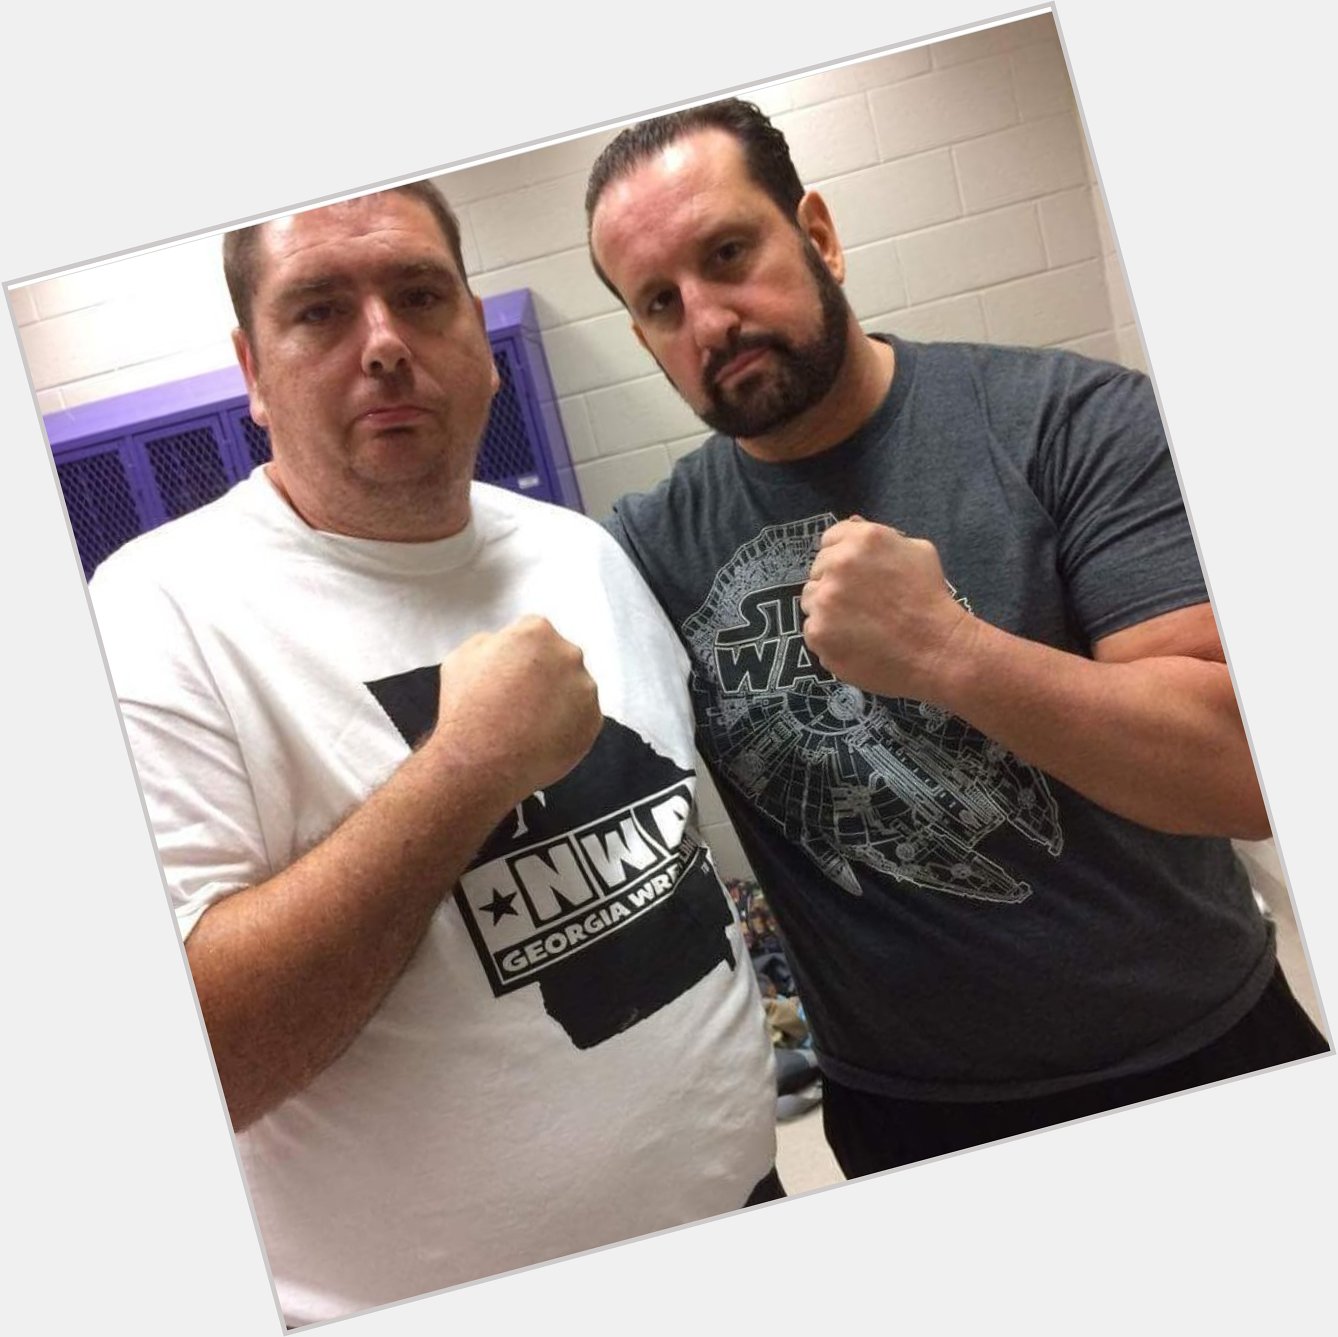  happy birthday to the Legend himself... Tommy Dreamer 